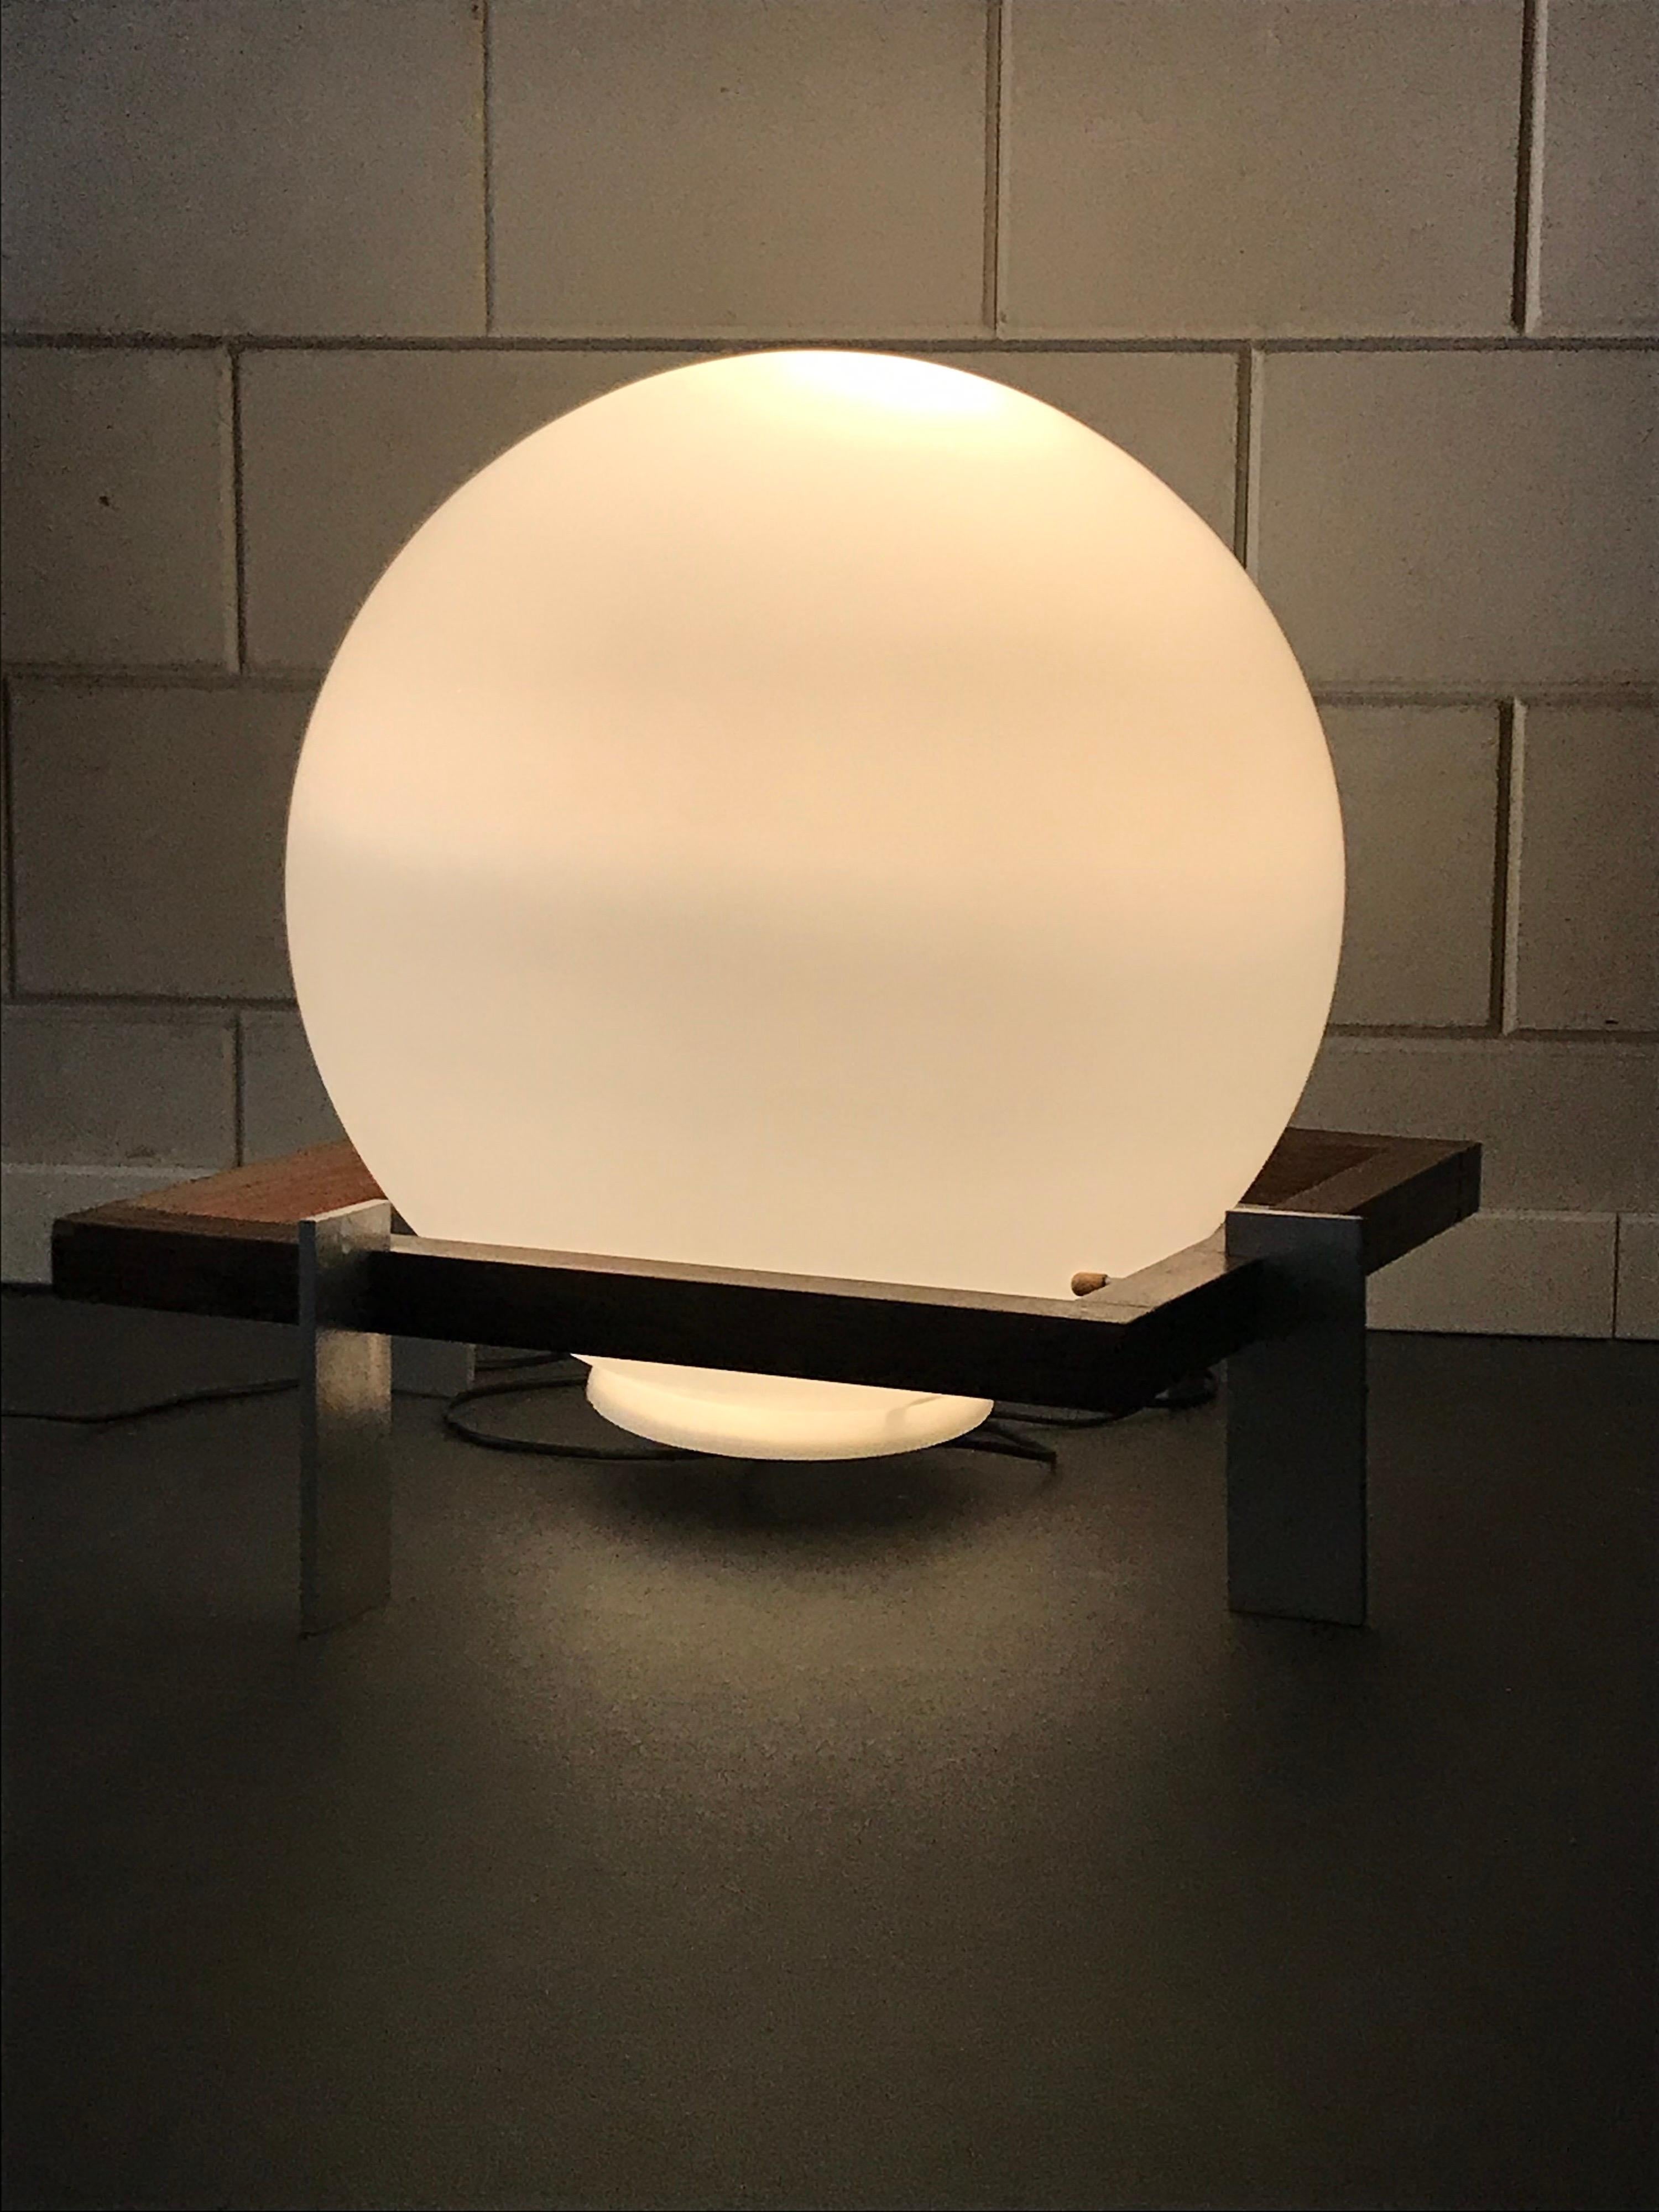 So called Zodiac table- or floor lamp from The Netherlands designed for RAAK Amsterdam.
Ton Alberts designed it in 1974 and it remained an absolute classic. Part of the Rijksmuseum Collection as well.
Large opaline glass ball resting on a solid